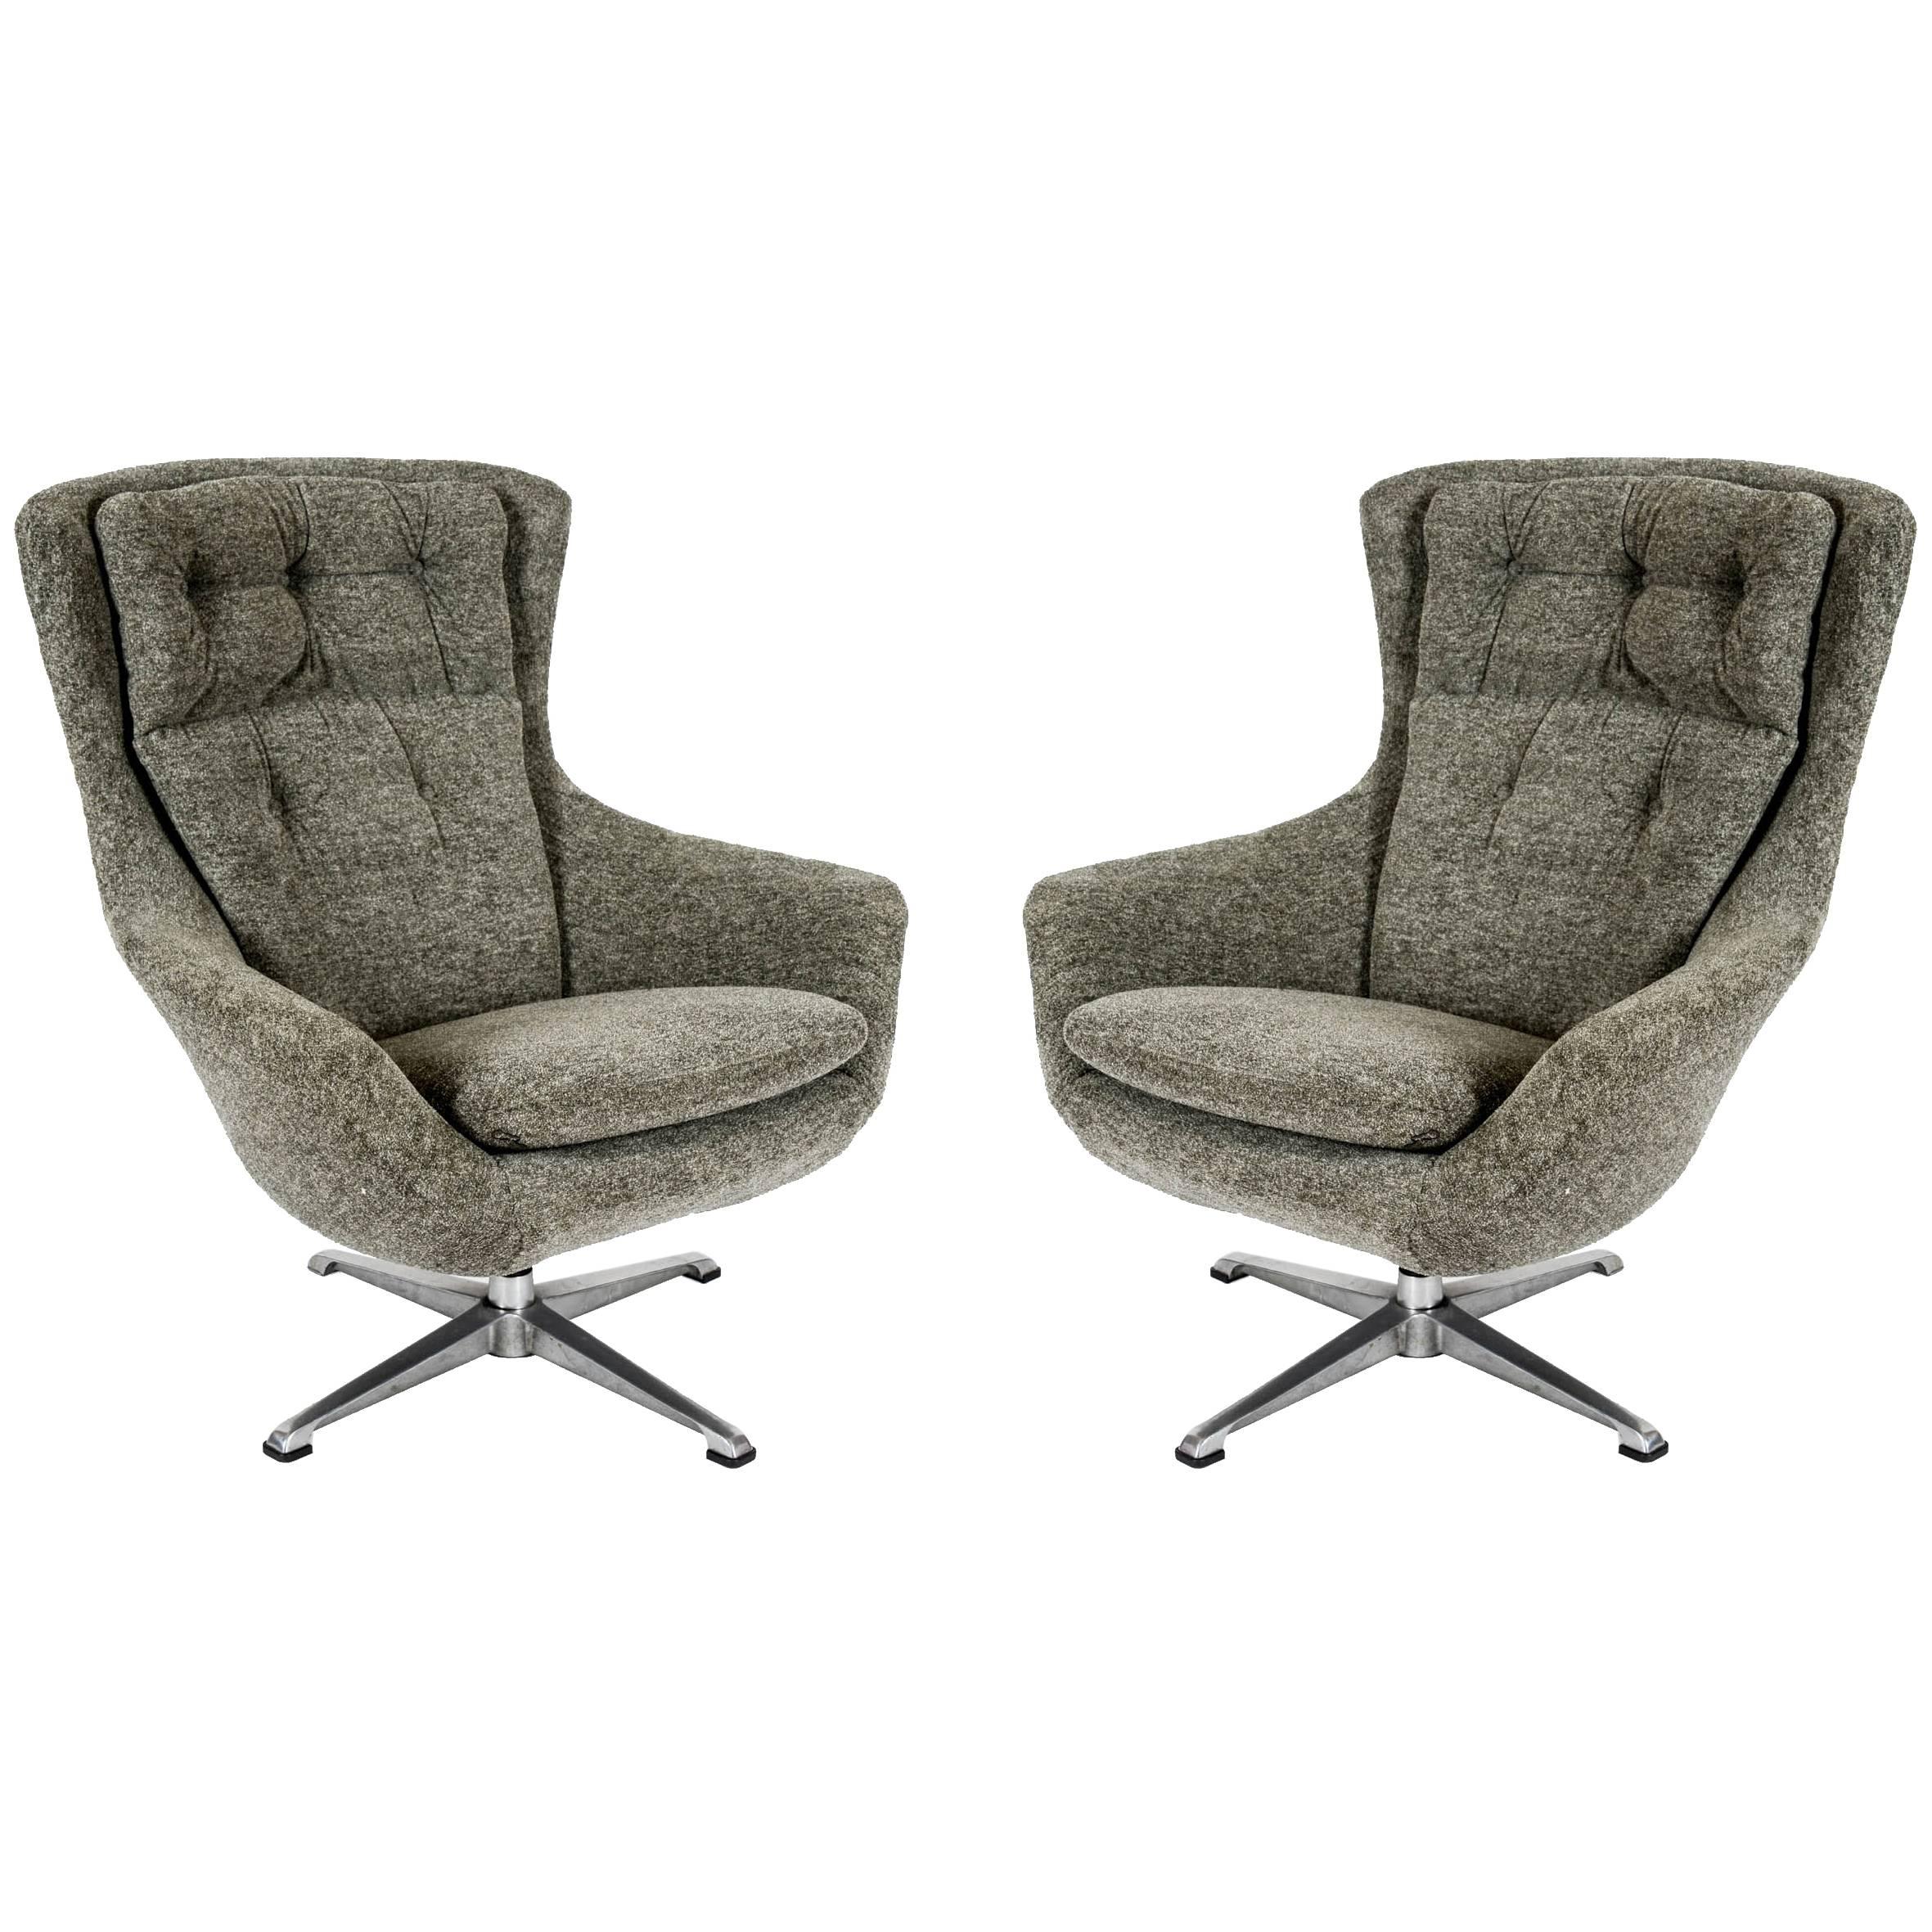 Pair of Swivel Armchairs at cost price.